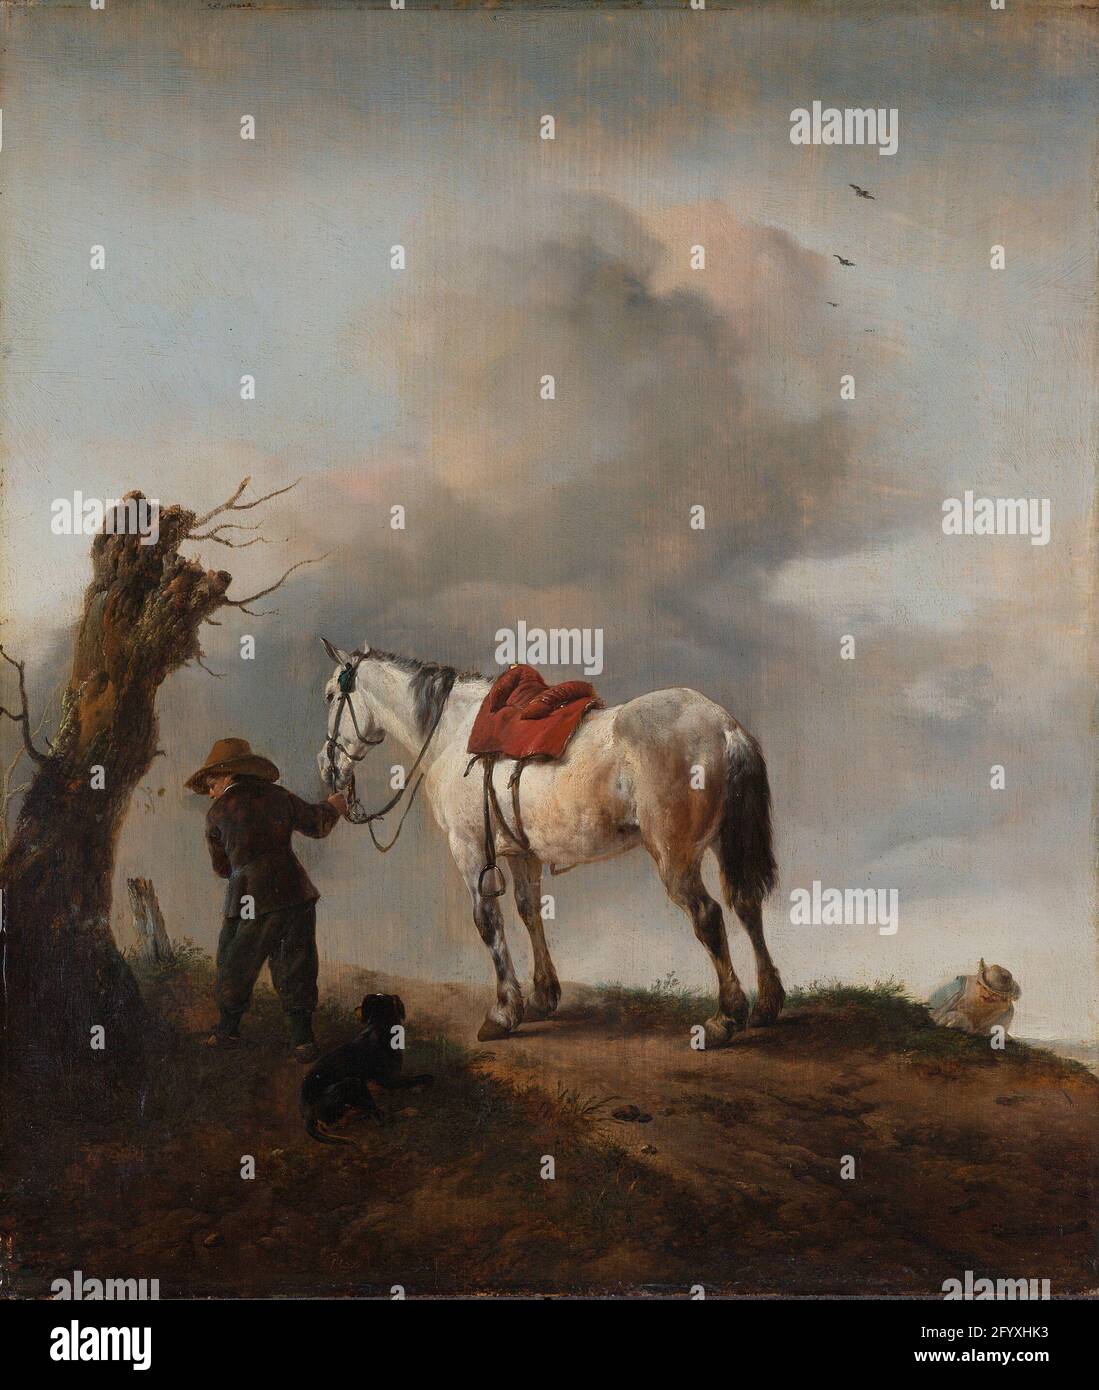 The Grey Horse. A grey horse, whose reins are held by a boy, plays the  leading role in this small panel. The horse stands outclearly against the  dramatic cloudy sky. Wouwerman's rendering